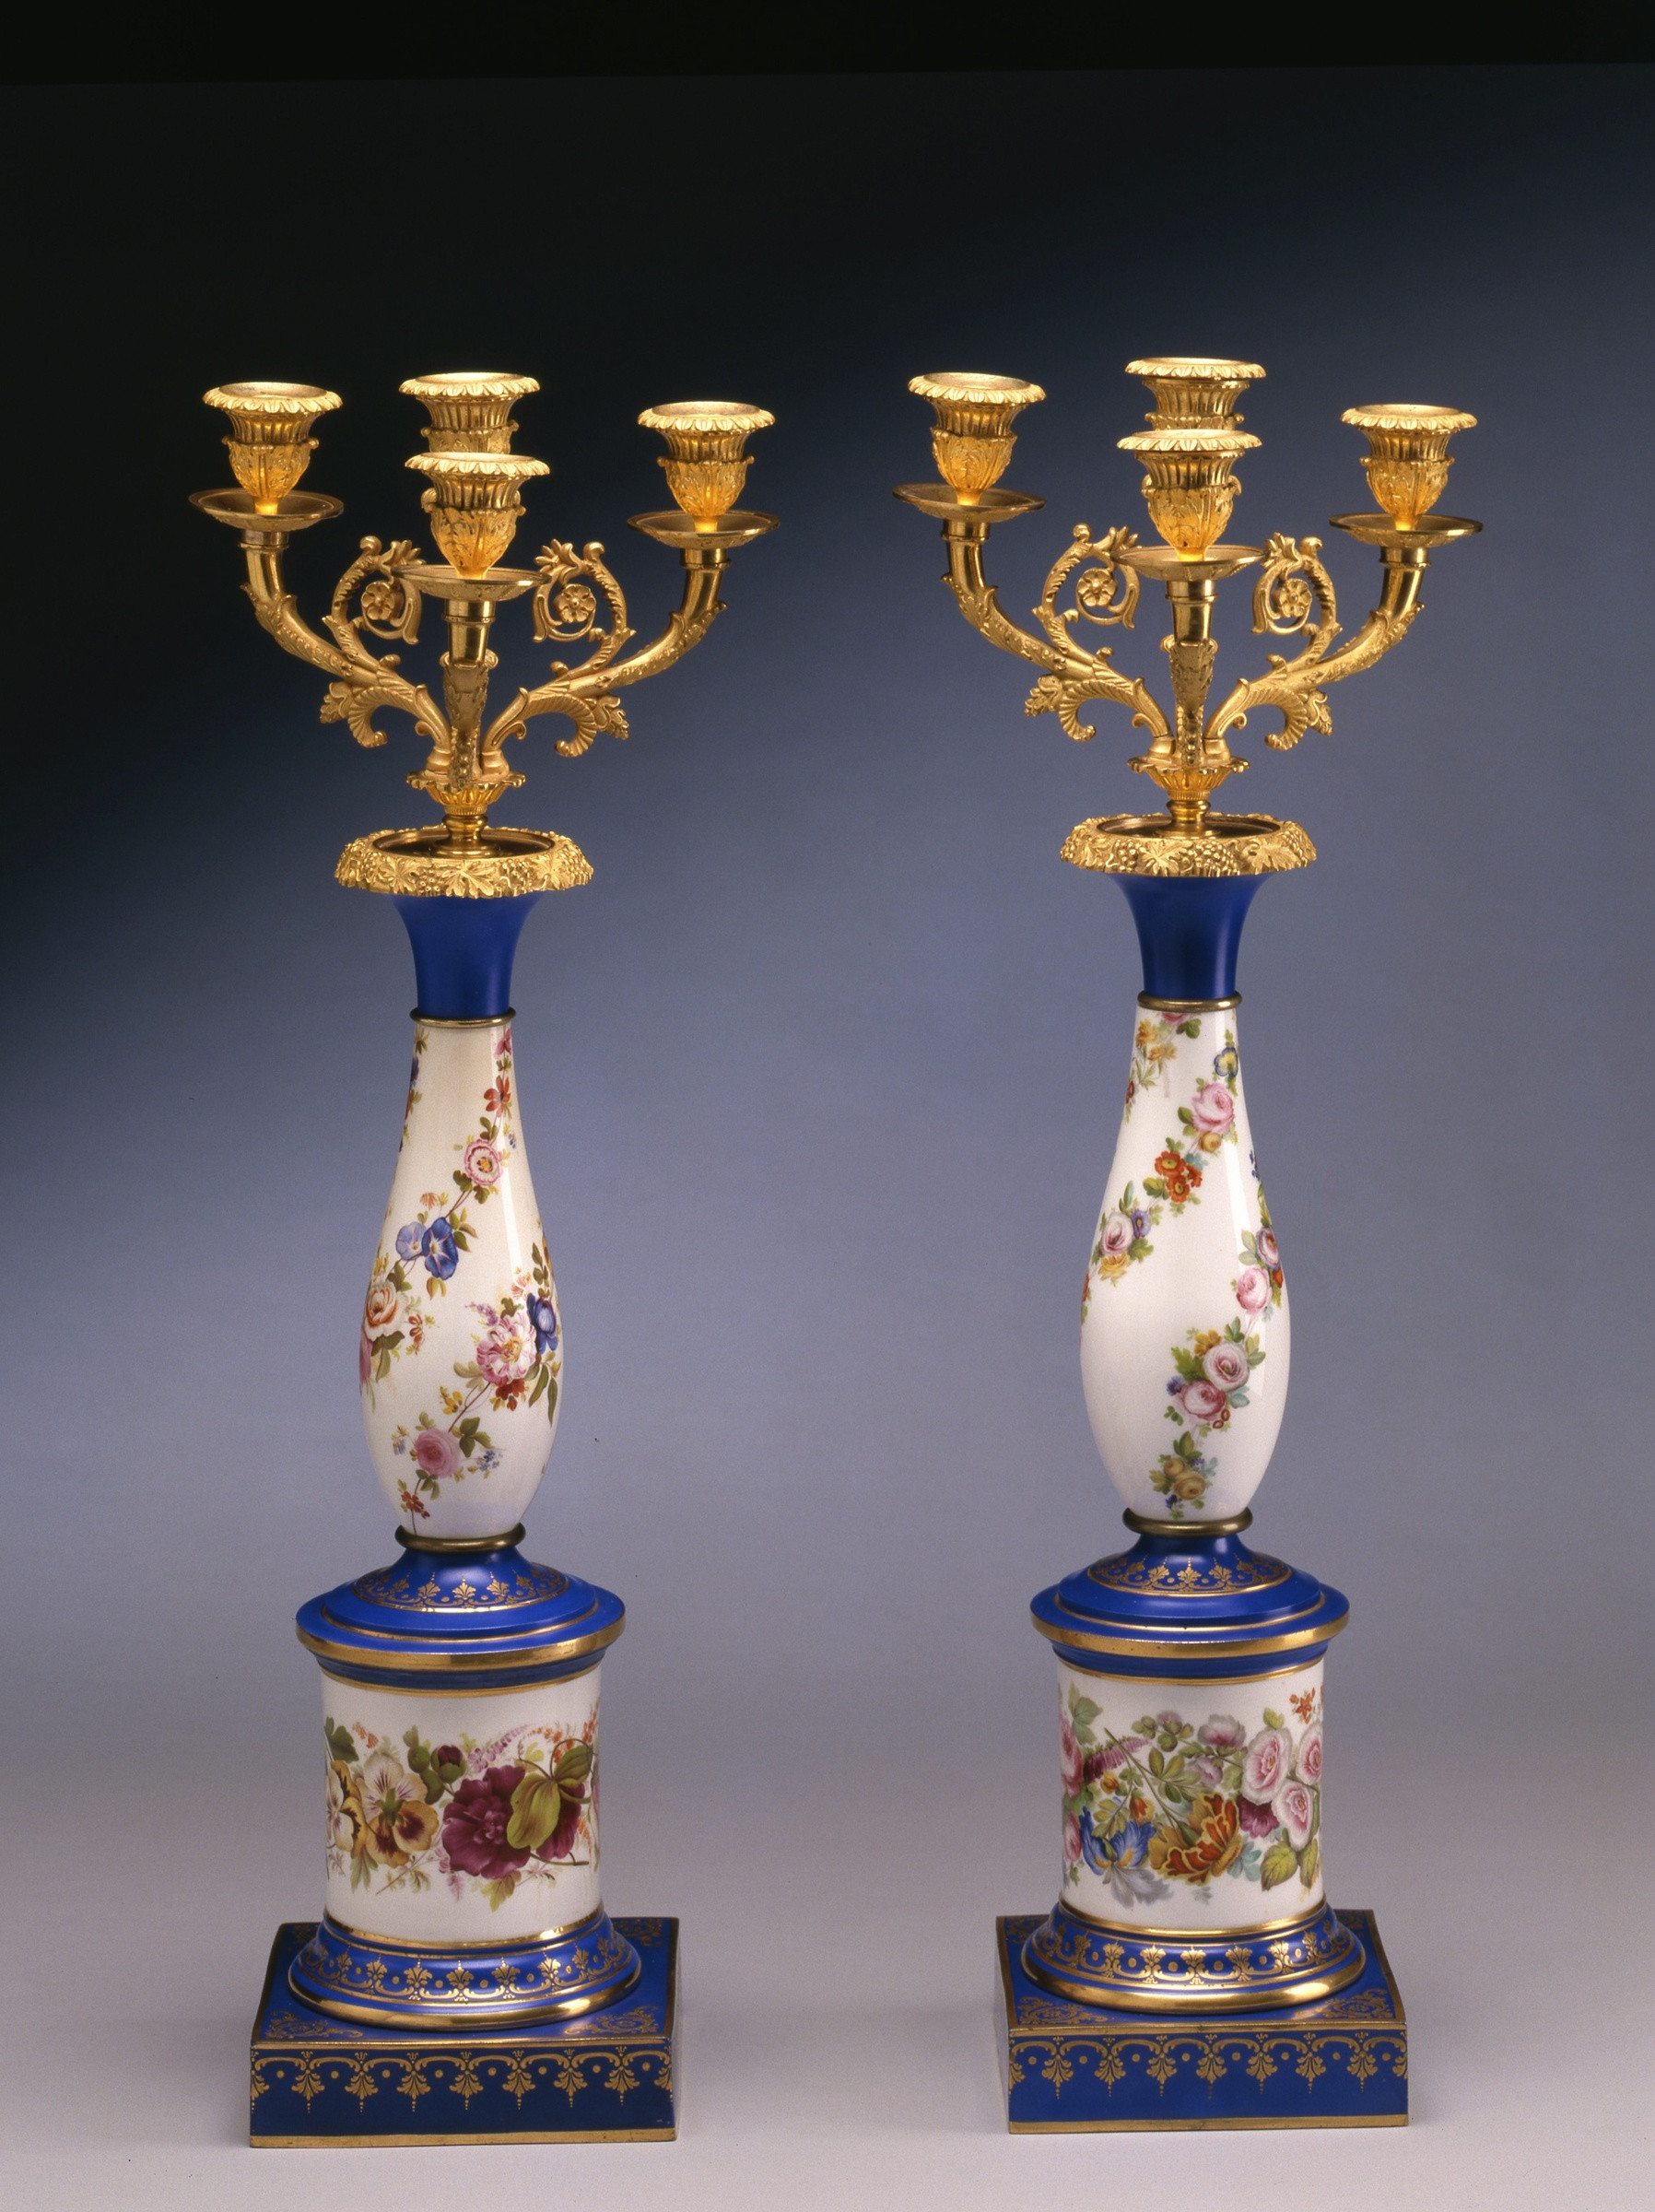 16 Fashionable Antique French Porcelain Vases 2024 free download antique french porcelain vases of paris porcelain a pair of late empire three light candelabra paris intended for a pair of late empire three light candelabra